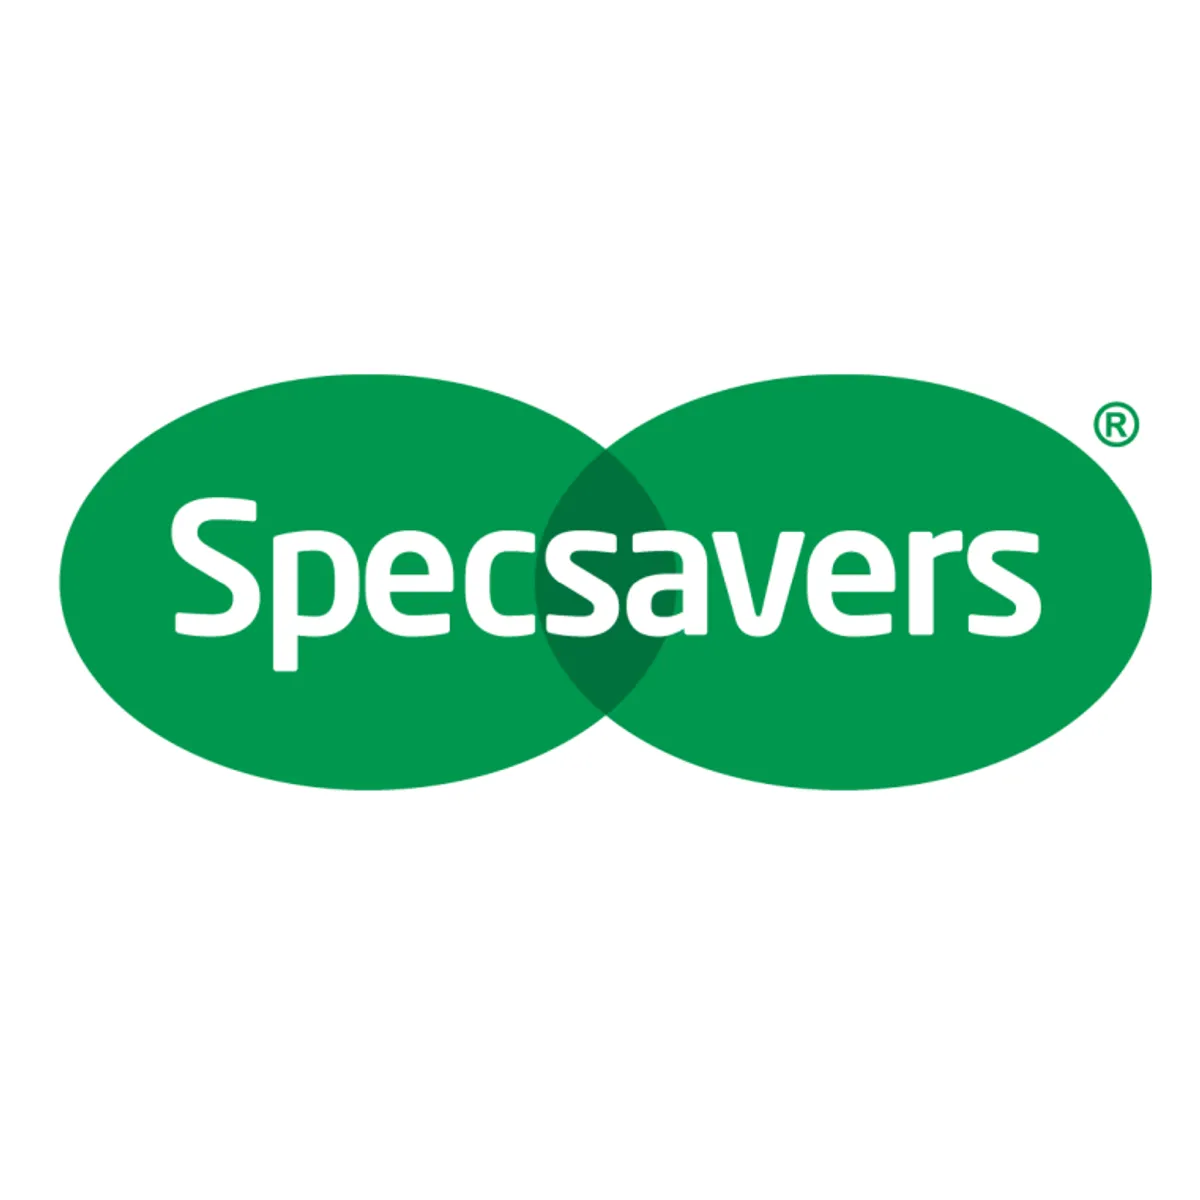 Specsavers Square Tile